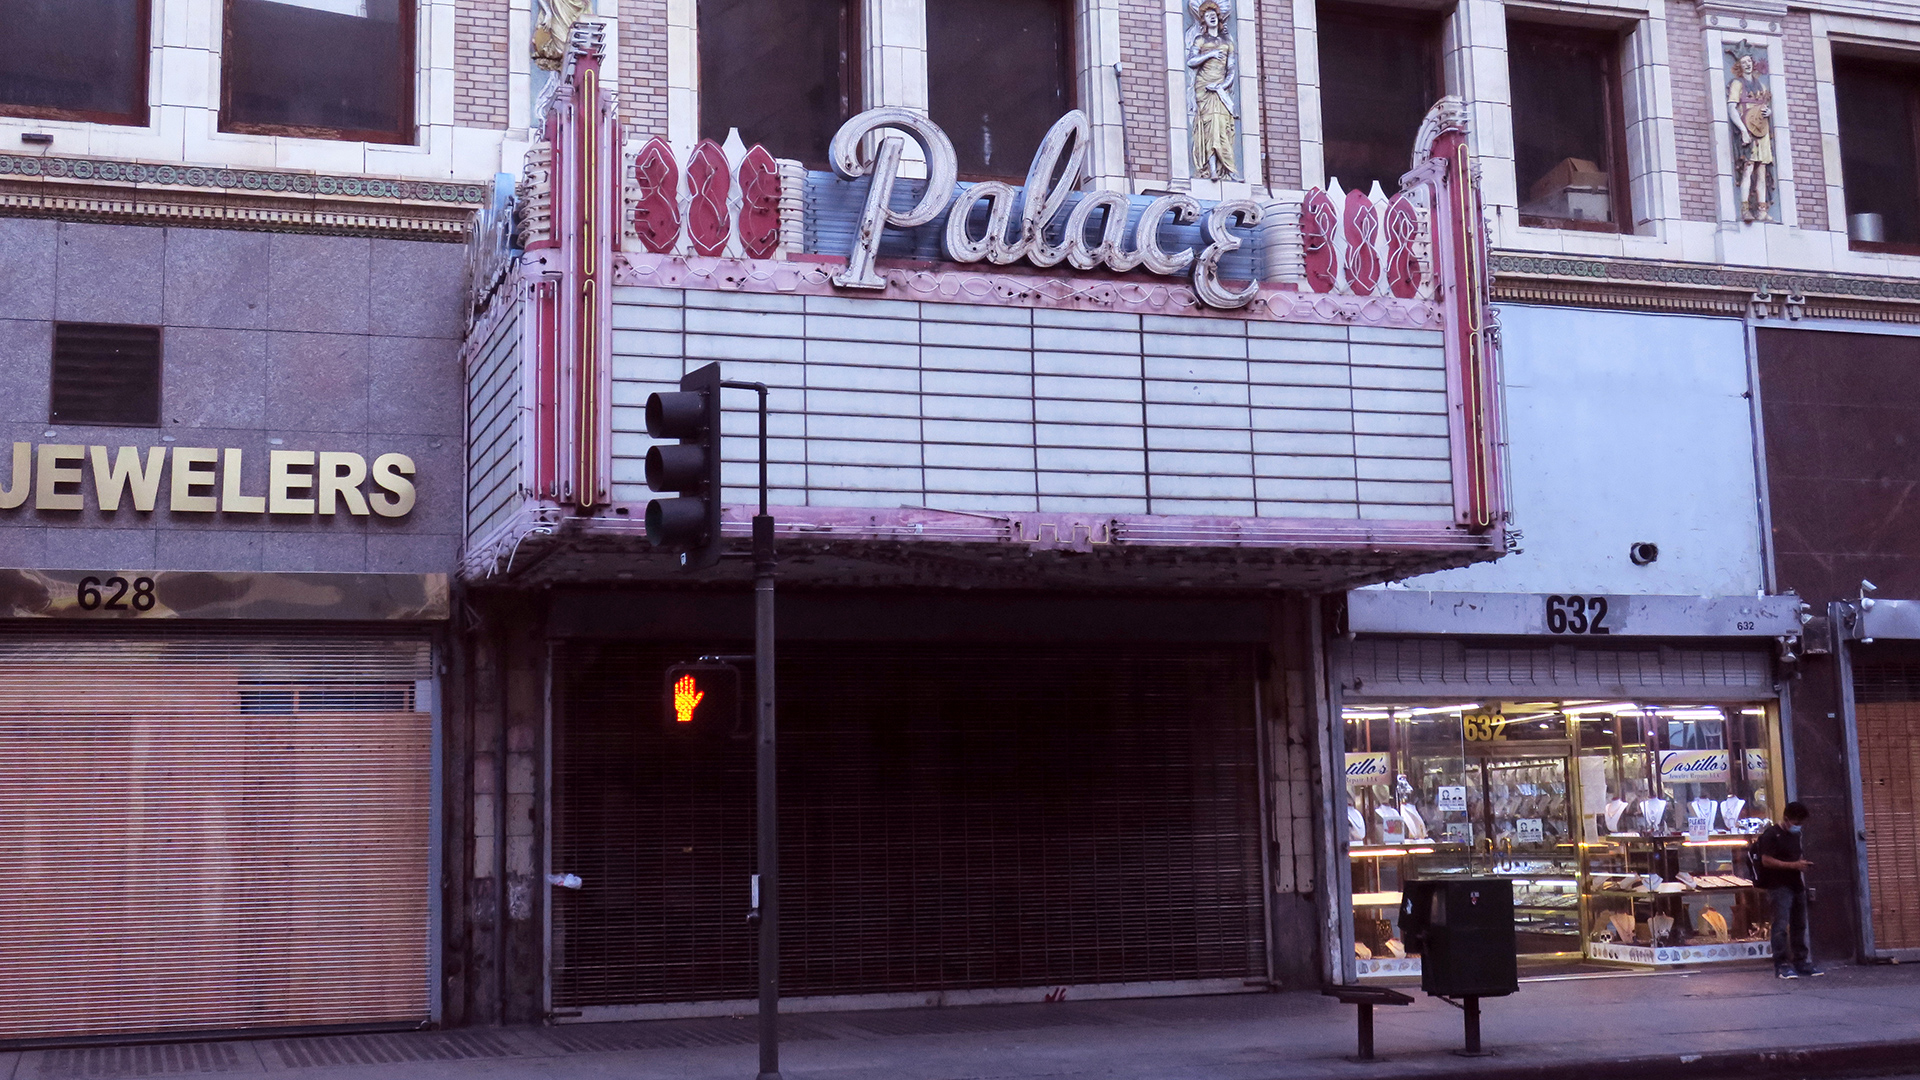 A cinema stands deserted during the Covid 19 pandemic. Image: Shutterstock.